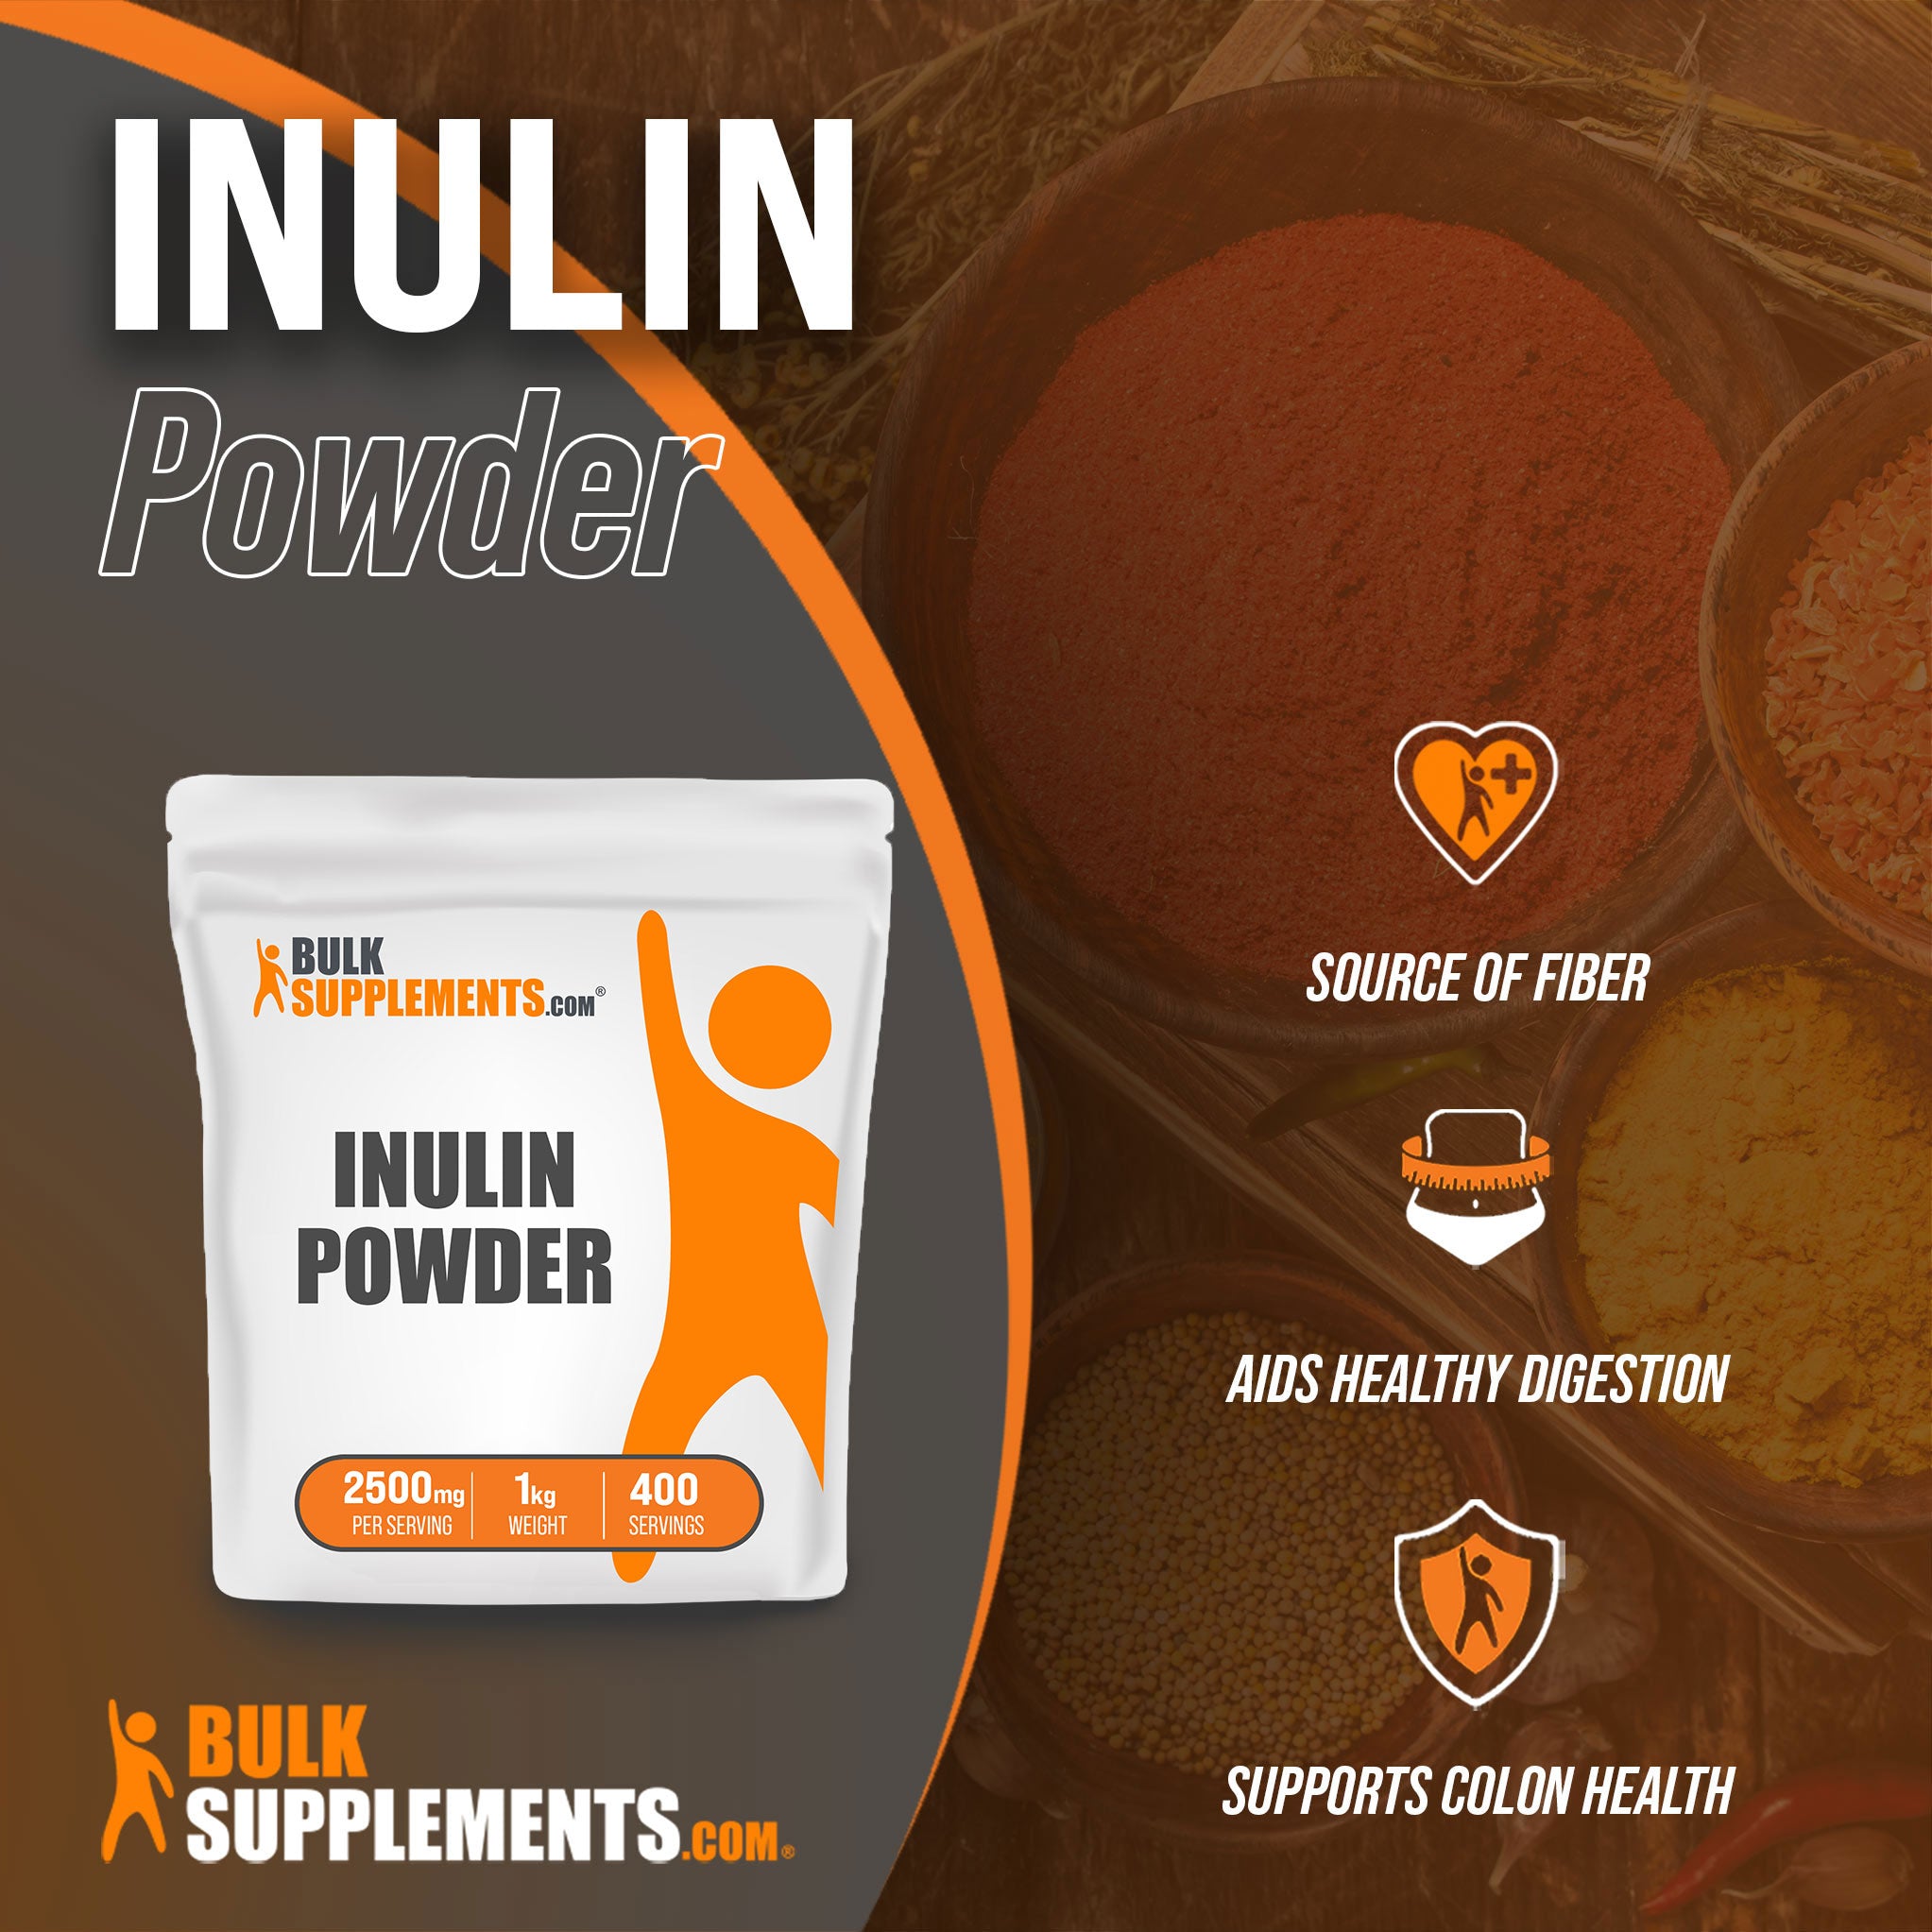 Benefits of Inulin Powder; source of fiber, aids healthy digestion, supports colon health